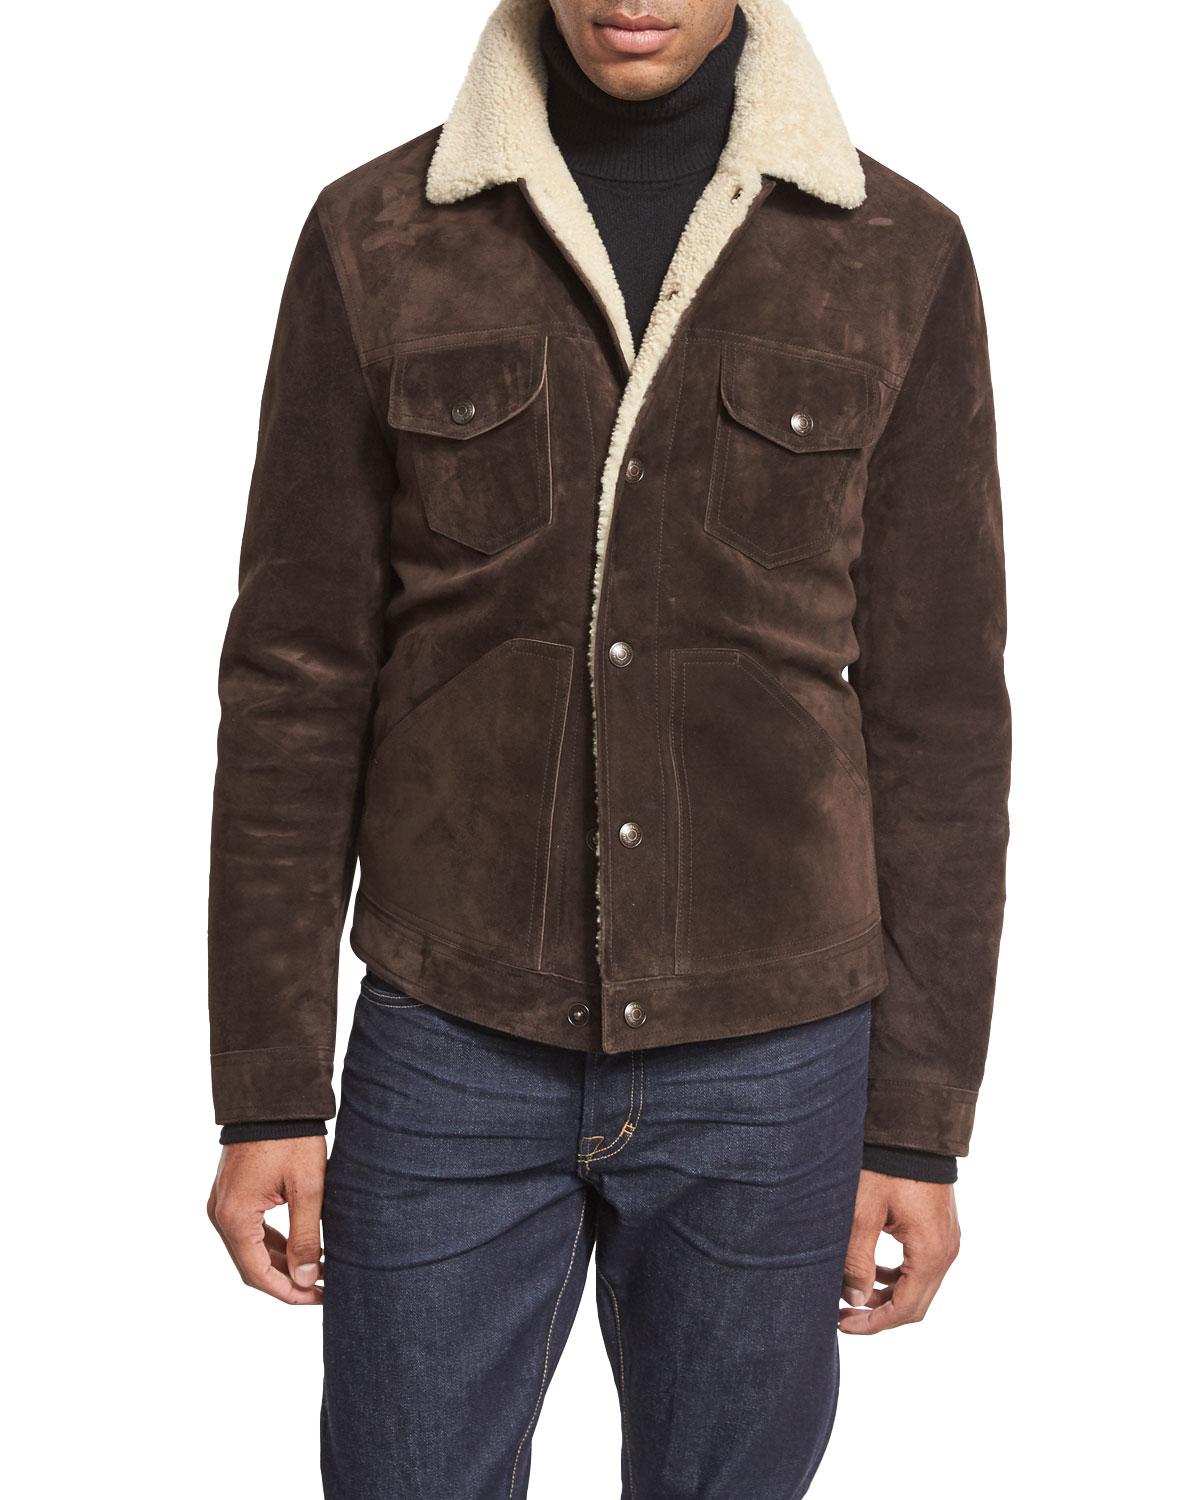 Tom Ford Shearling-lined Suede Jacket in Brown for Men - Lyst